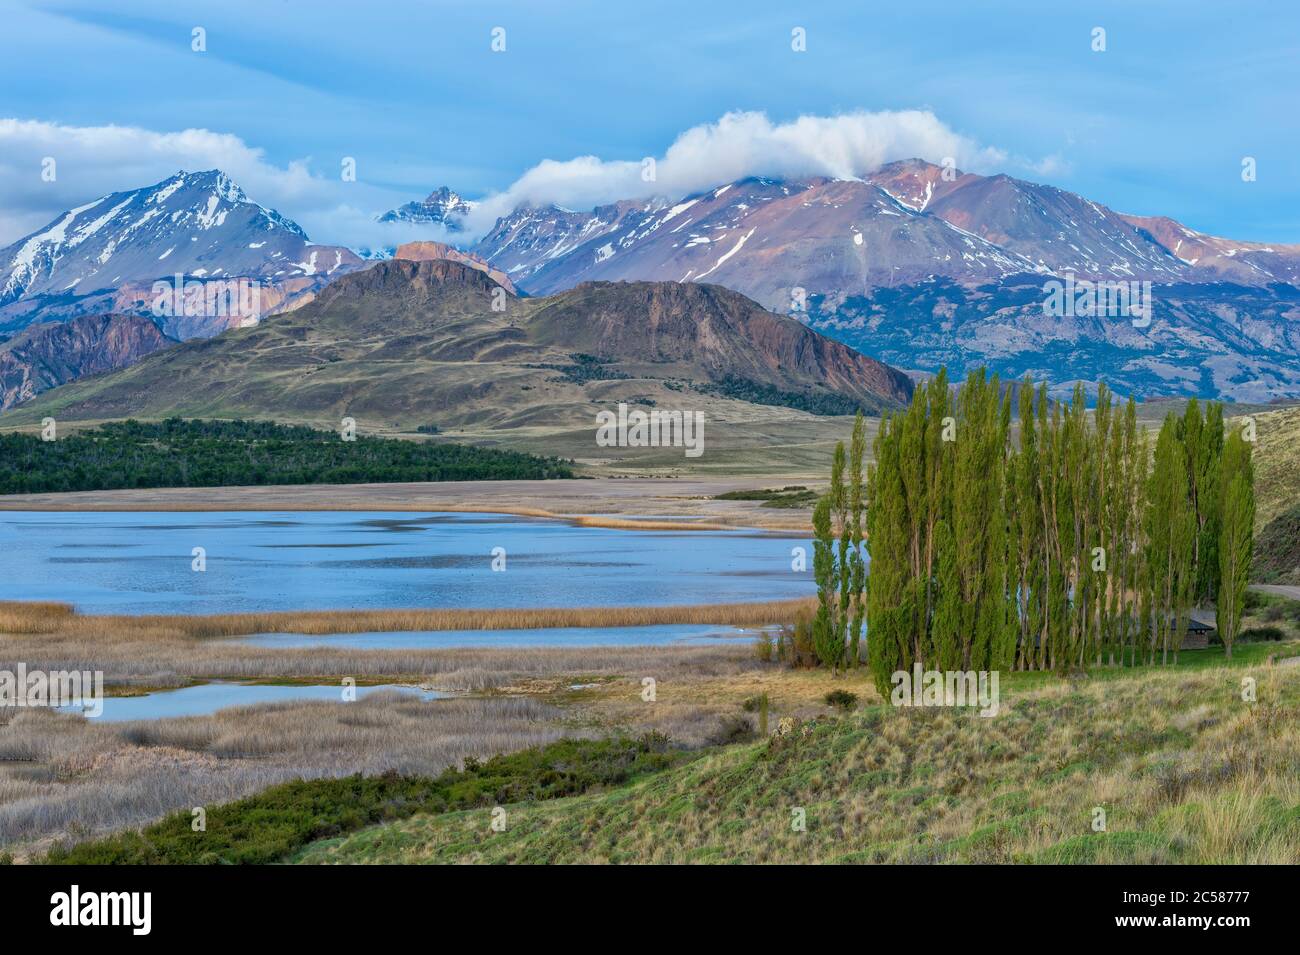 Poplar trees in front of the Andes, Patagonia National Park, Chacabuco valley near Cochrane, Aysen Region, Patagonia, Chile Stock Photo